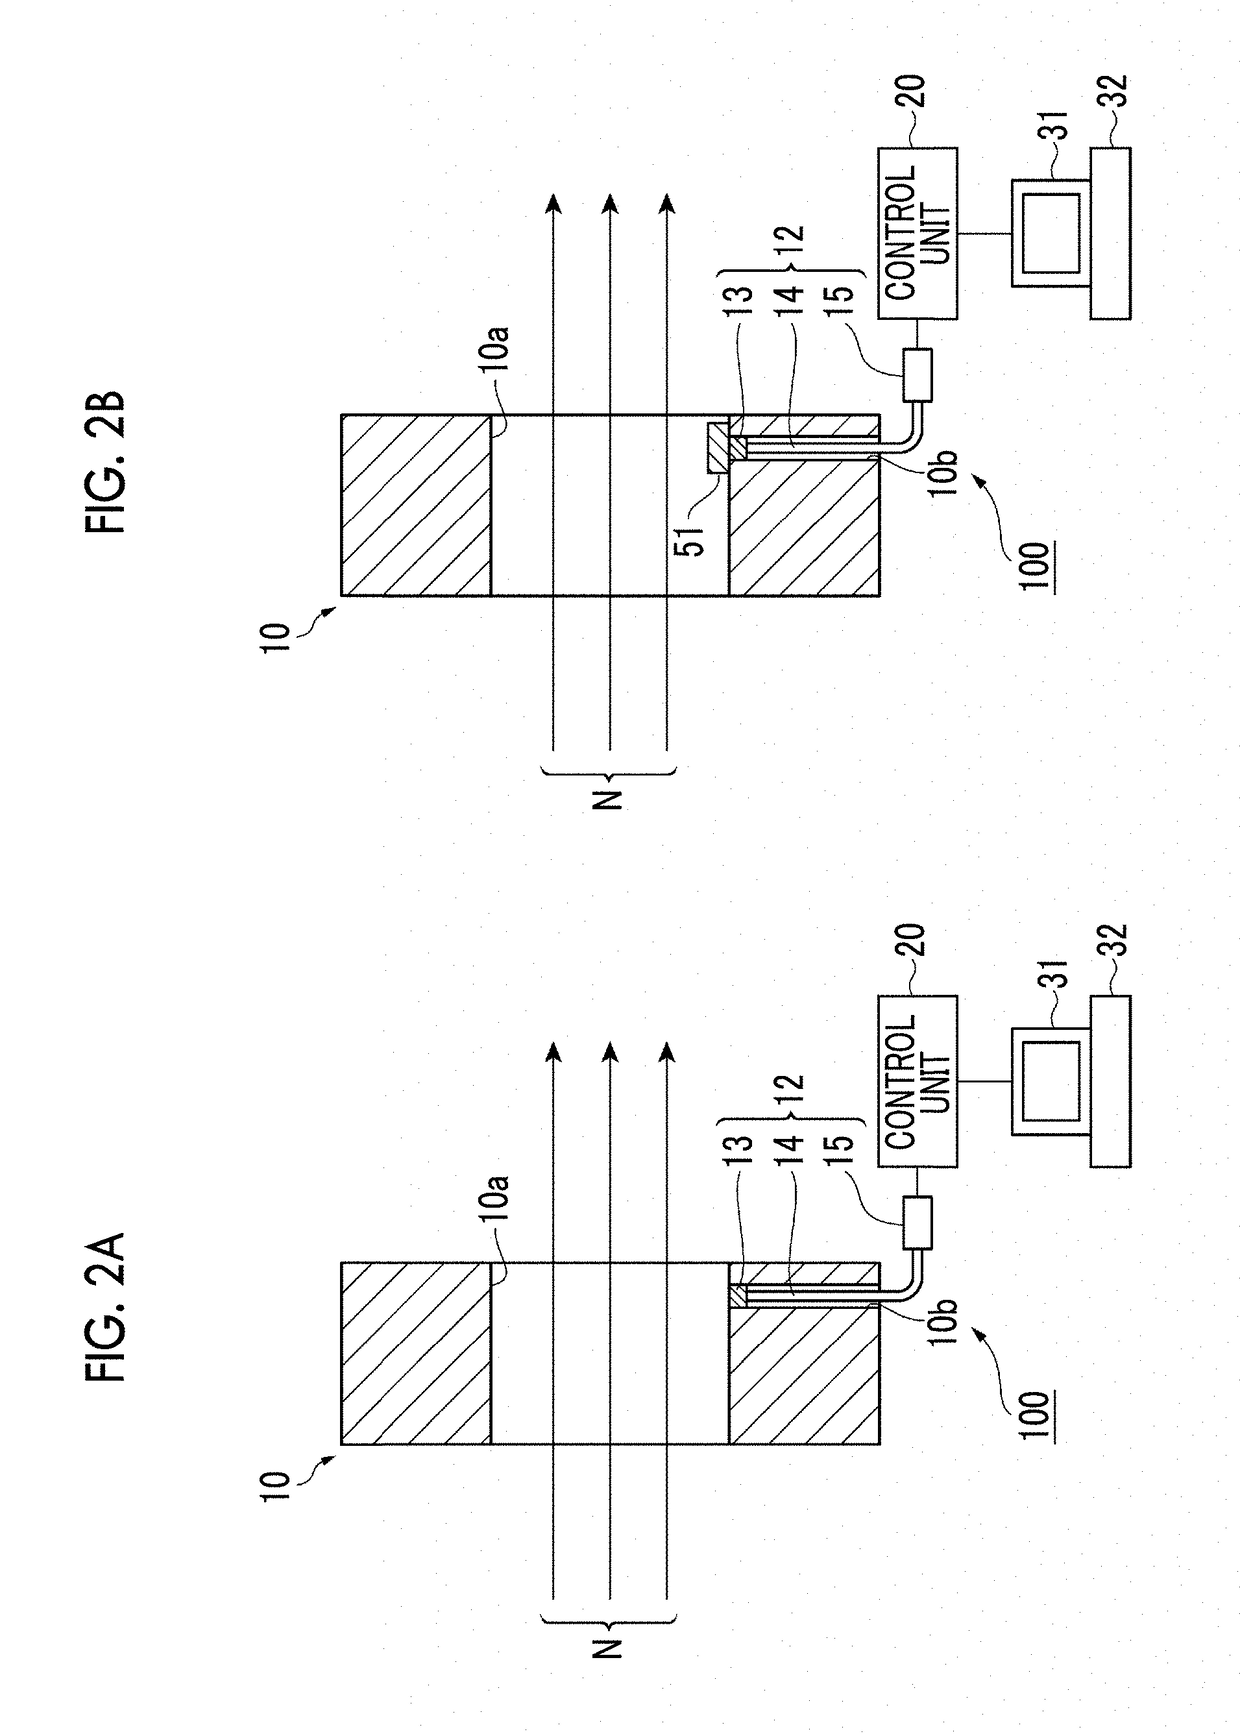 Neutron ray detecting system, and method of setting neutron ray detecting system